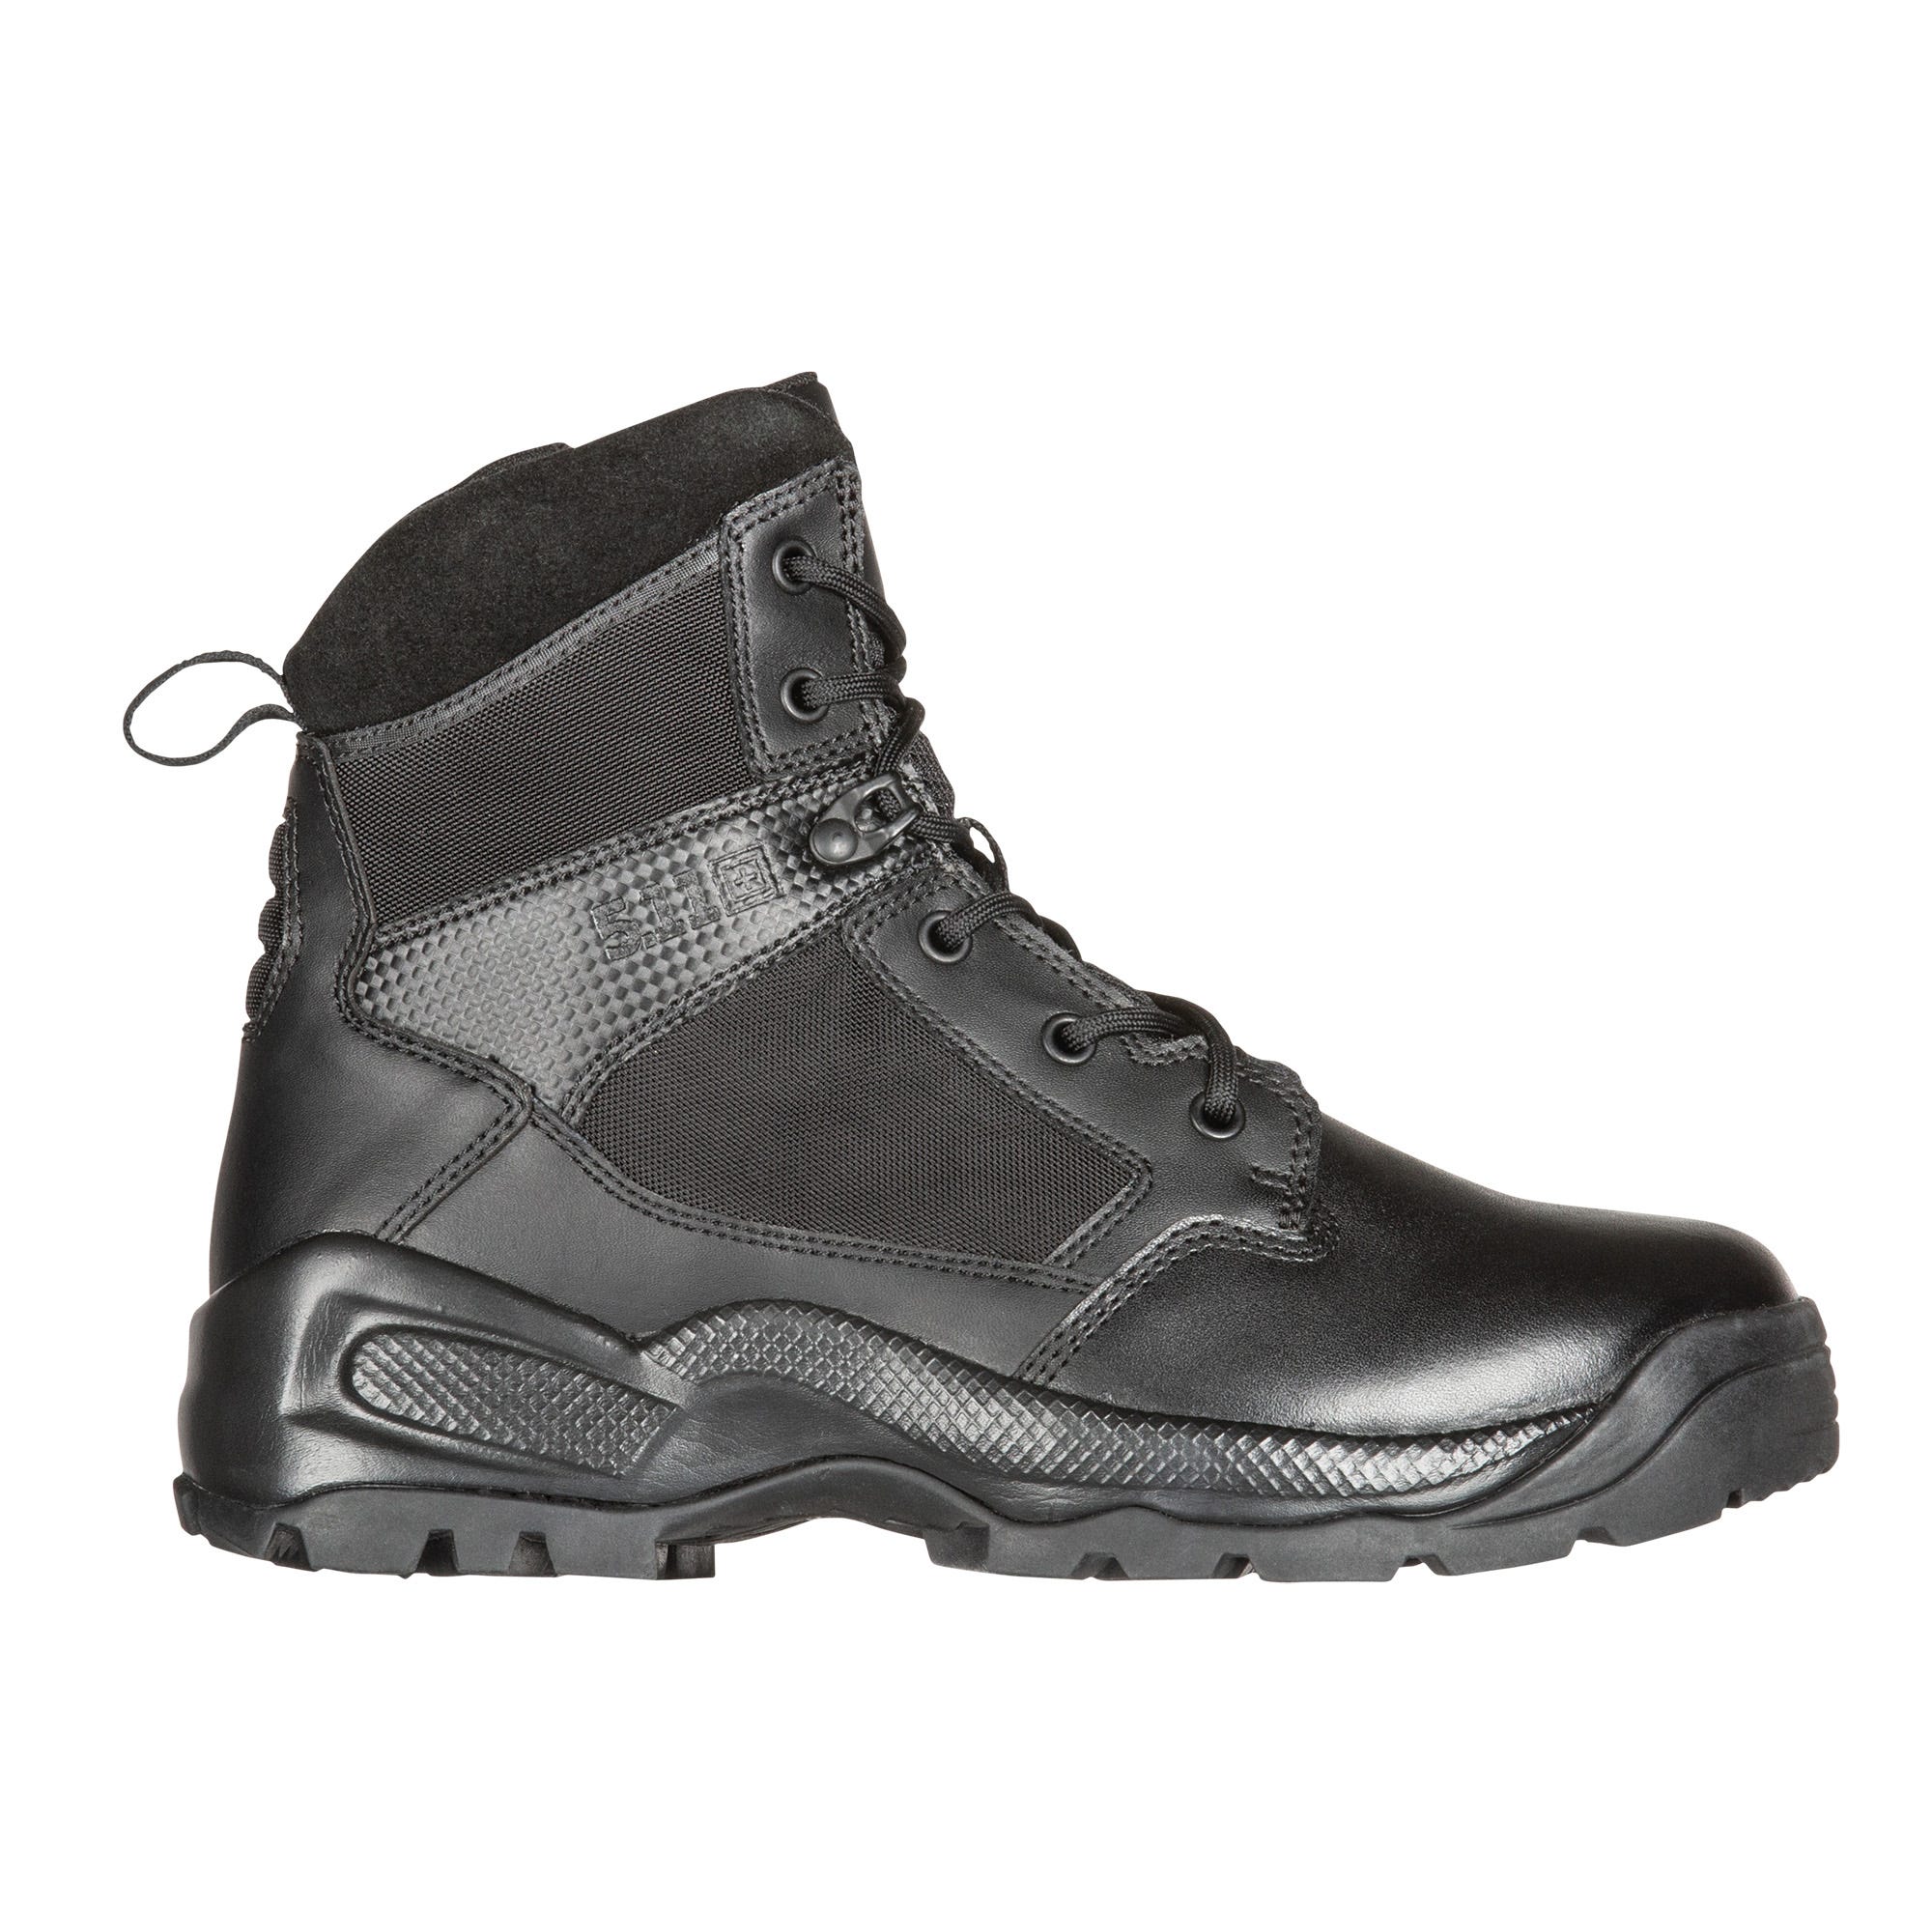 Equipped with OrthoLite Insoles and Fence-climbing Toes 5.11 Men's Speed 3.0 Jungle Tactical Boot Military & Tactical 